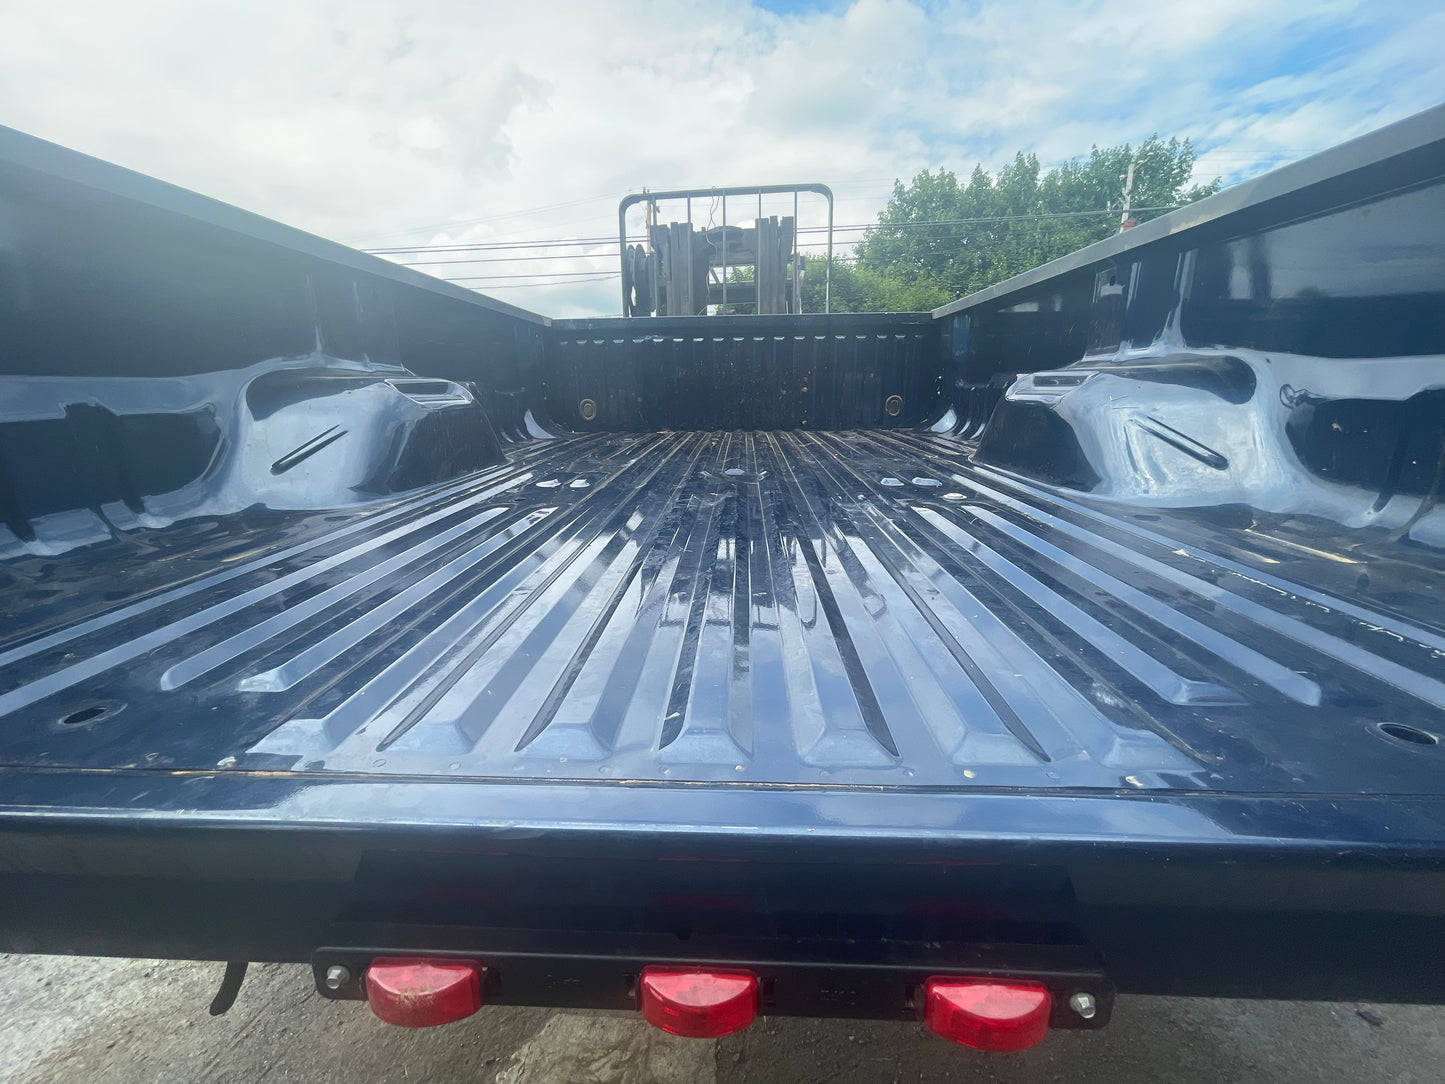 2011-2016 Superduty 8' DRW Bed #12521 Blue Jeans N1